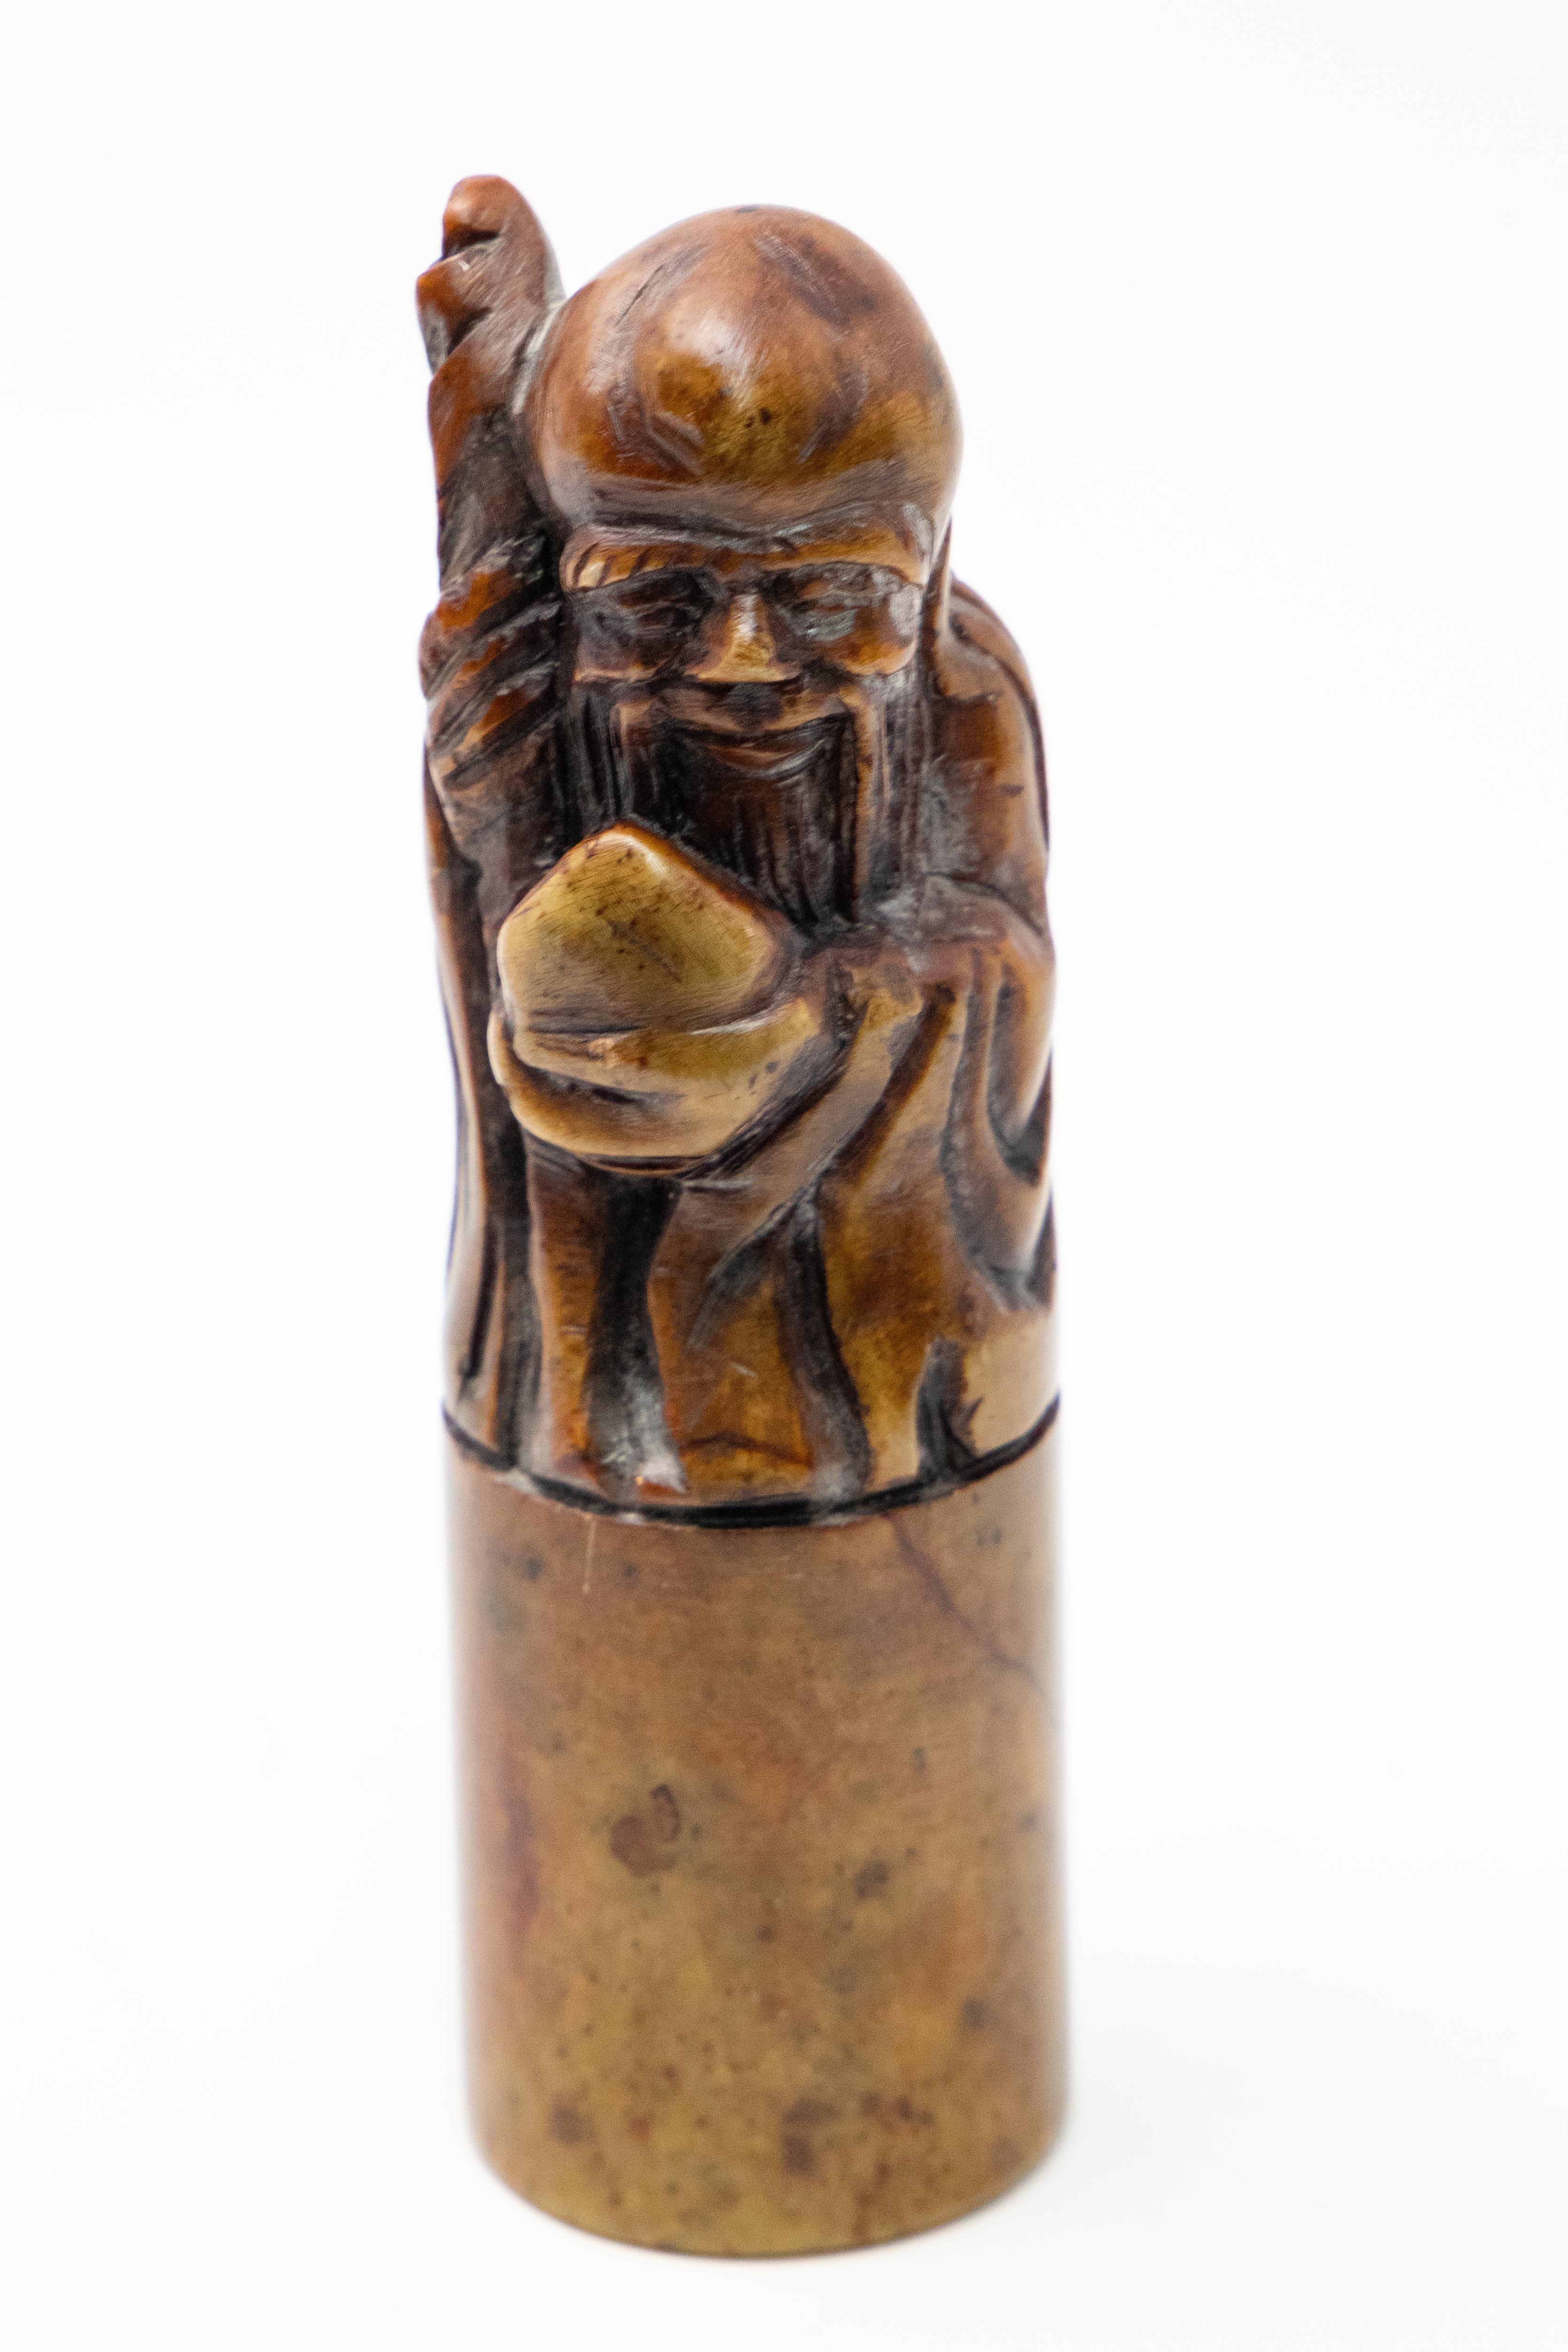 Offering this Chinese chop seal. On top it depicts Shoulao, god of longevity. He sits atop a cylindrical short base. He is blank all around and the bottom.

History of the Chinese chop seal. Chop seals have been a part of Chinese culture for